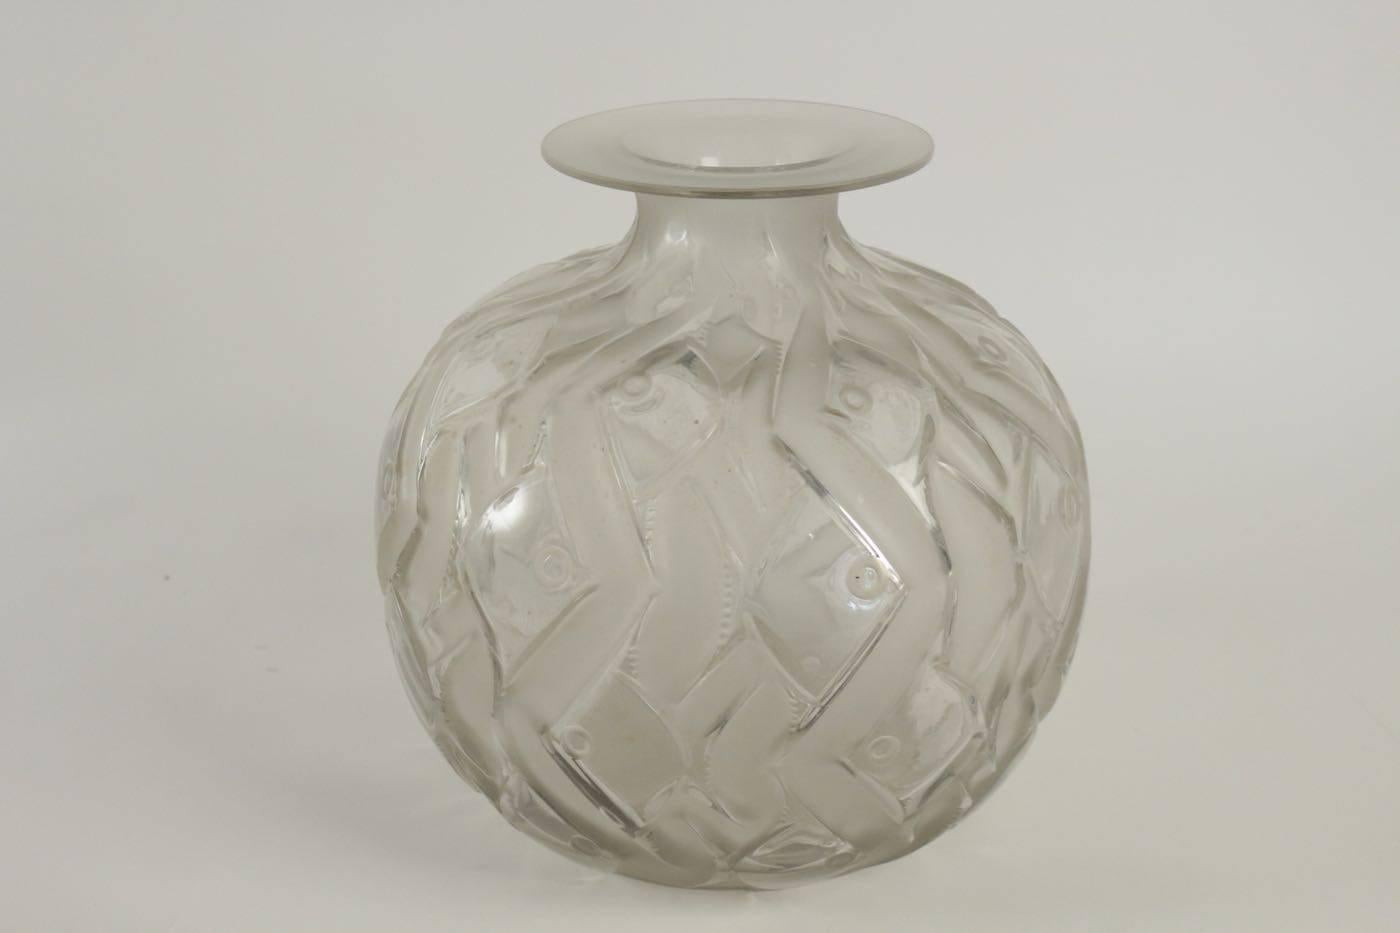 Artistic small fish in a geometric wavy pattern simulating water
circa 1928, France, model introduced 1928
Marcilhac no. 1011, 

Penthièvre vase or